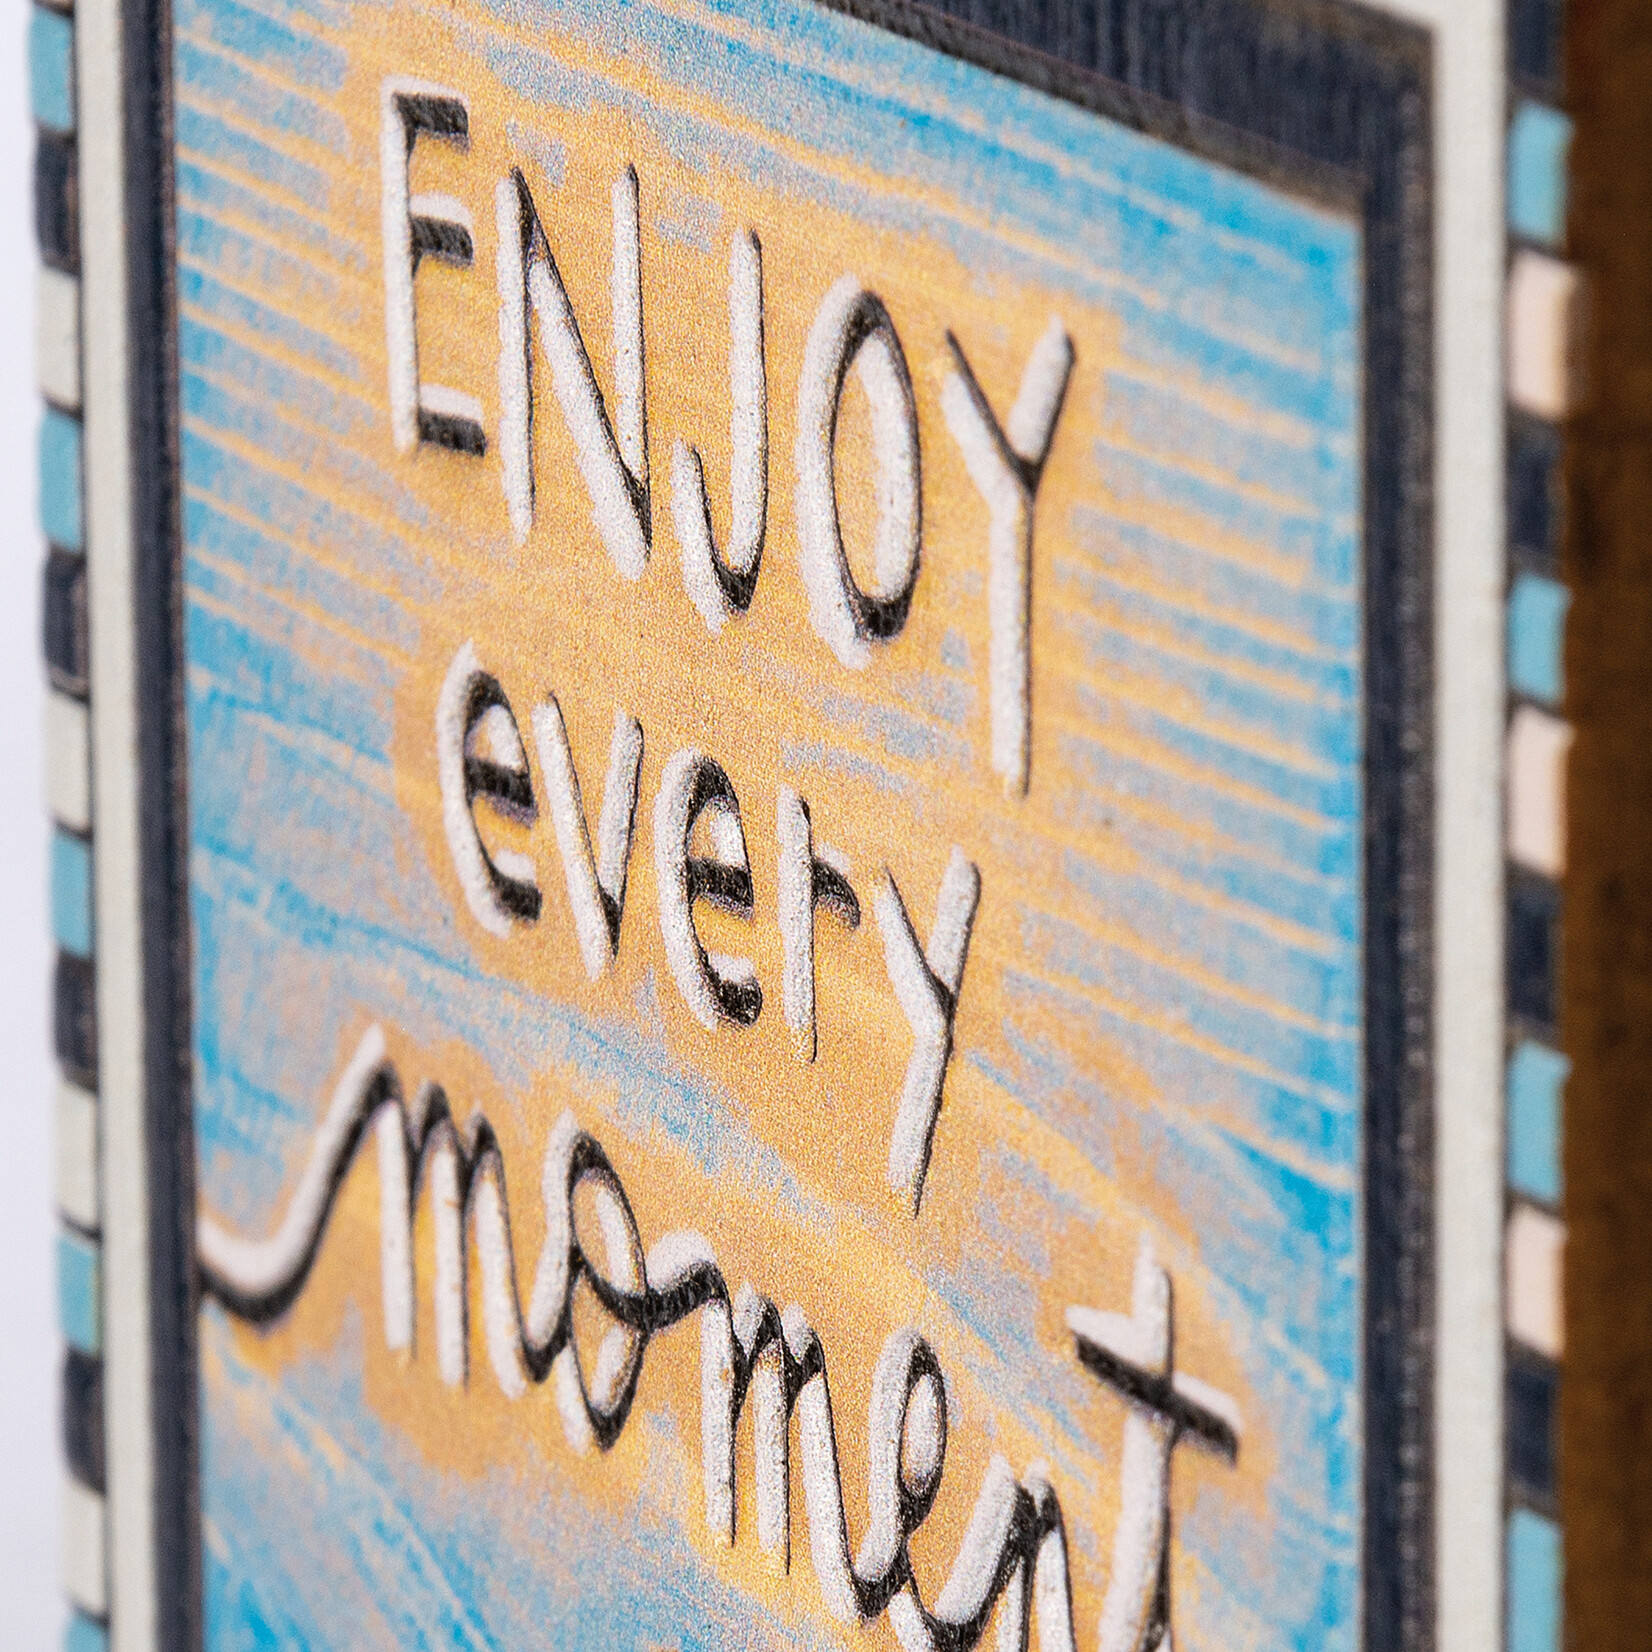 Primitives by Kathy Primitives by Kathy- Enjoy Every Moment Block Sign